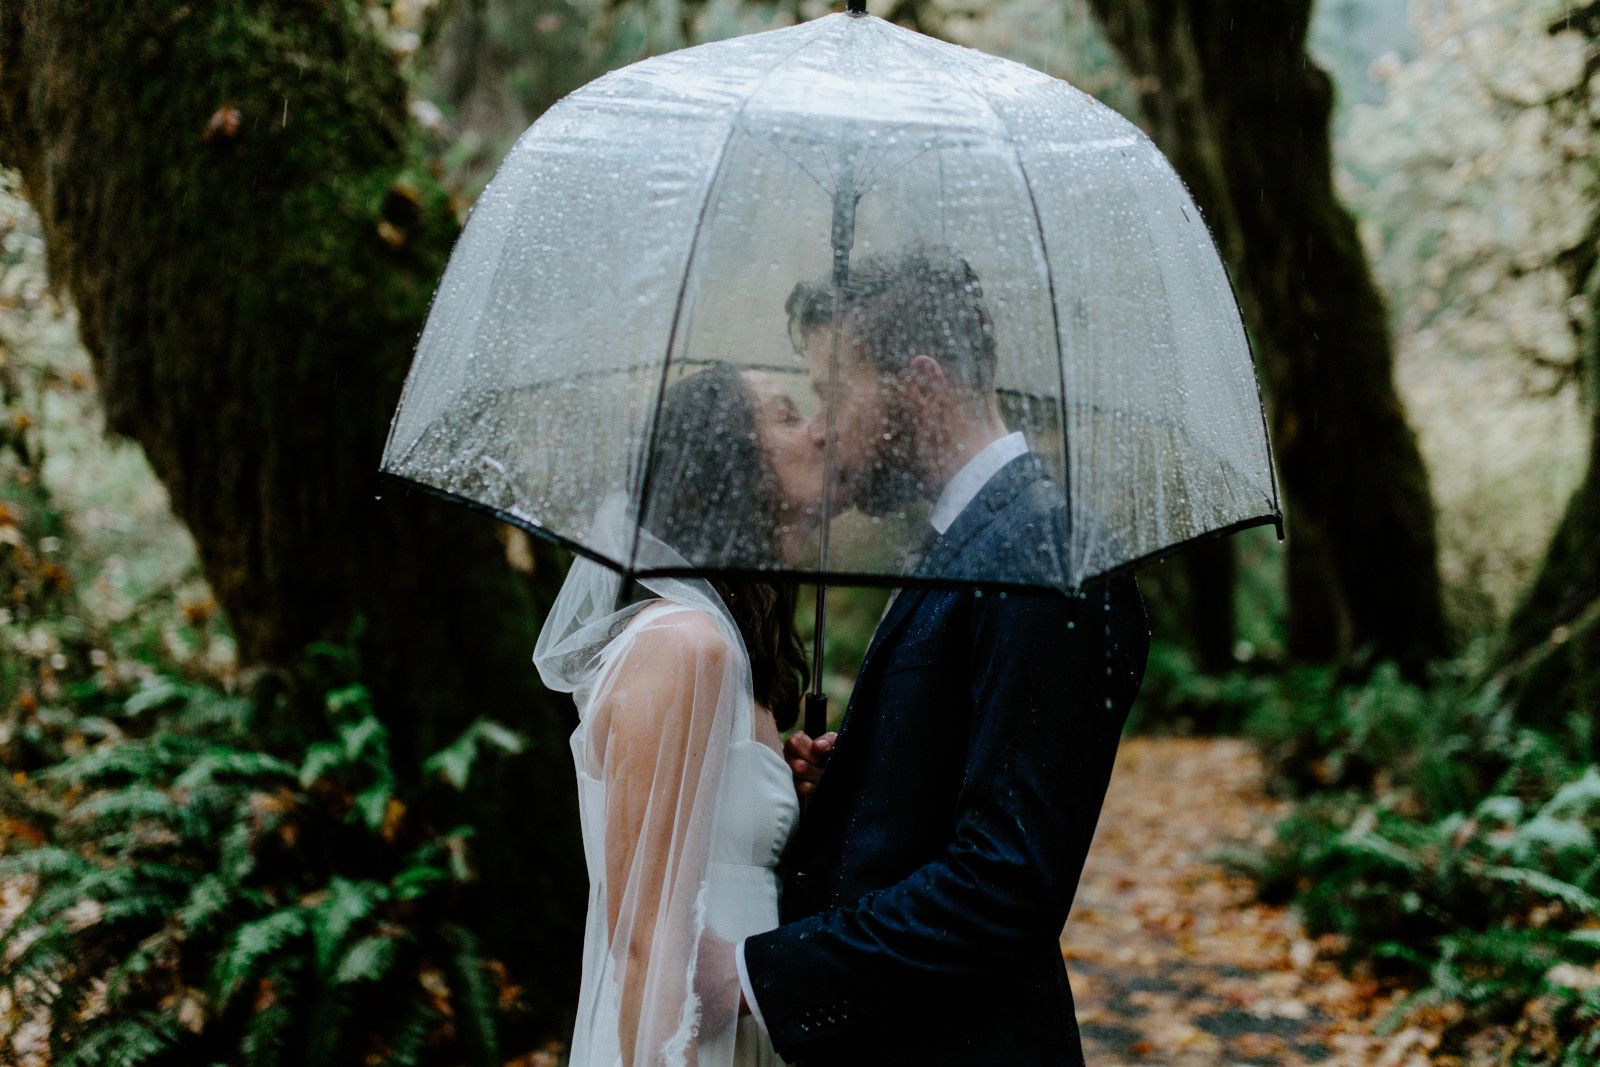 Mollie and Corey kiss under the umbrella. Elopement photography in the Olympic National Park by Sienna Plus Josh.